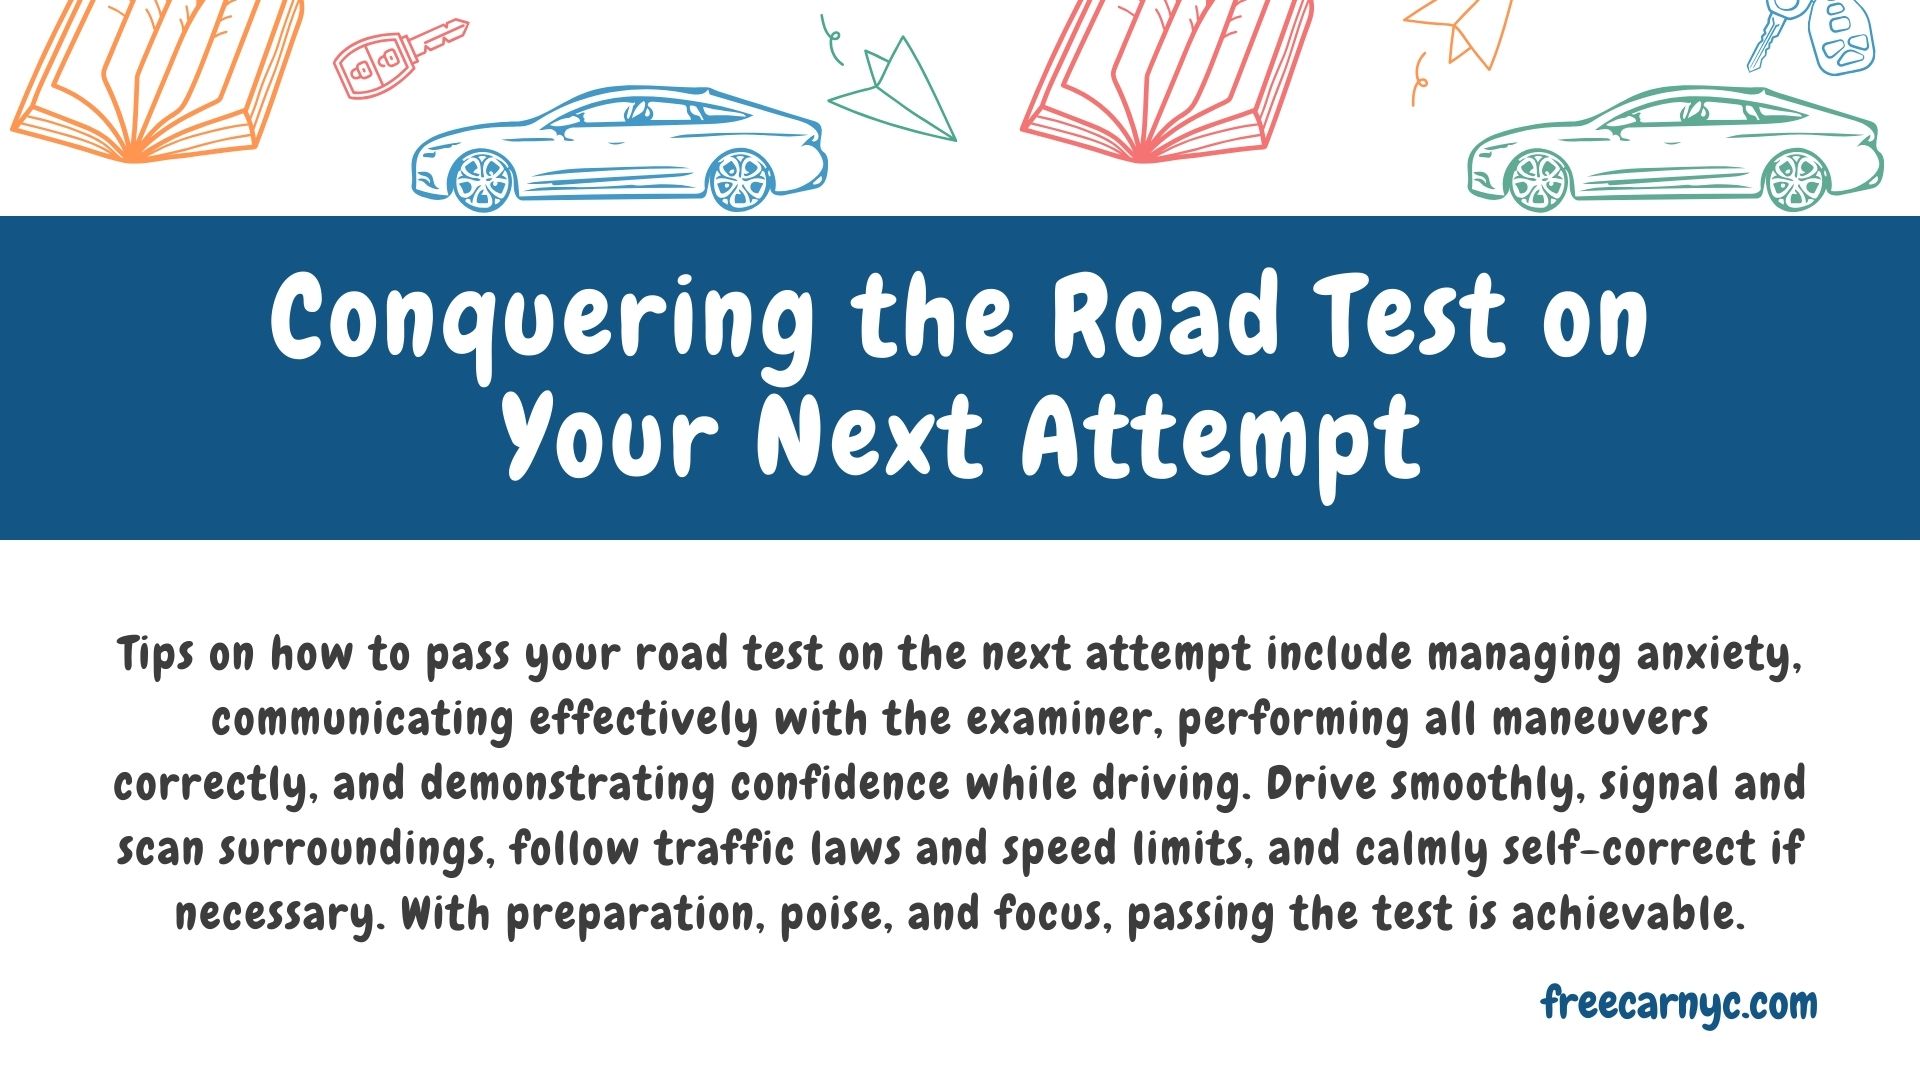 Conquering the Road Test on Your Next Attempt